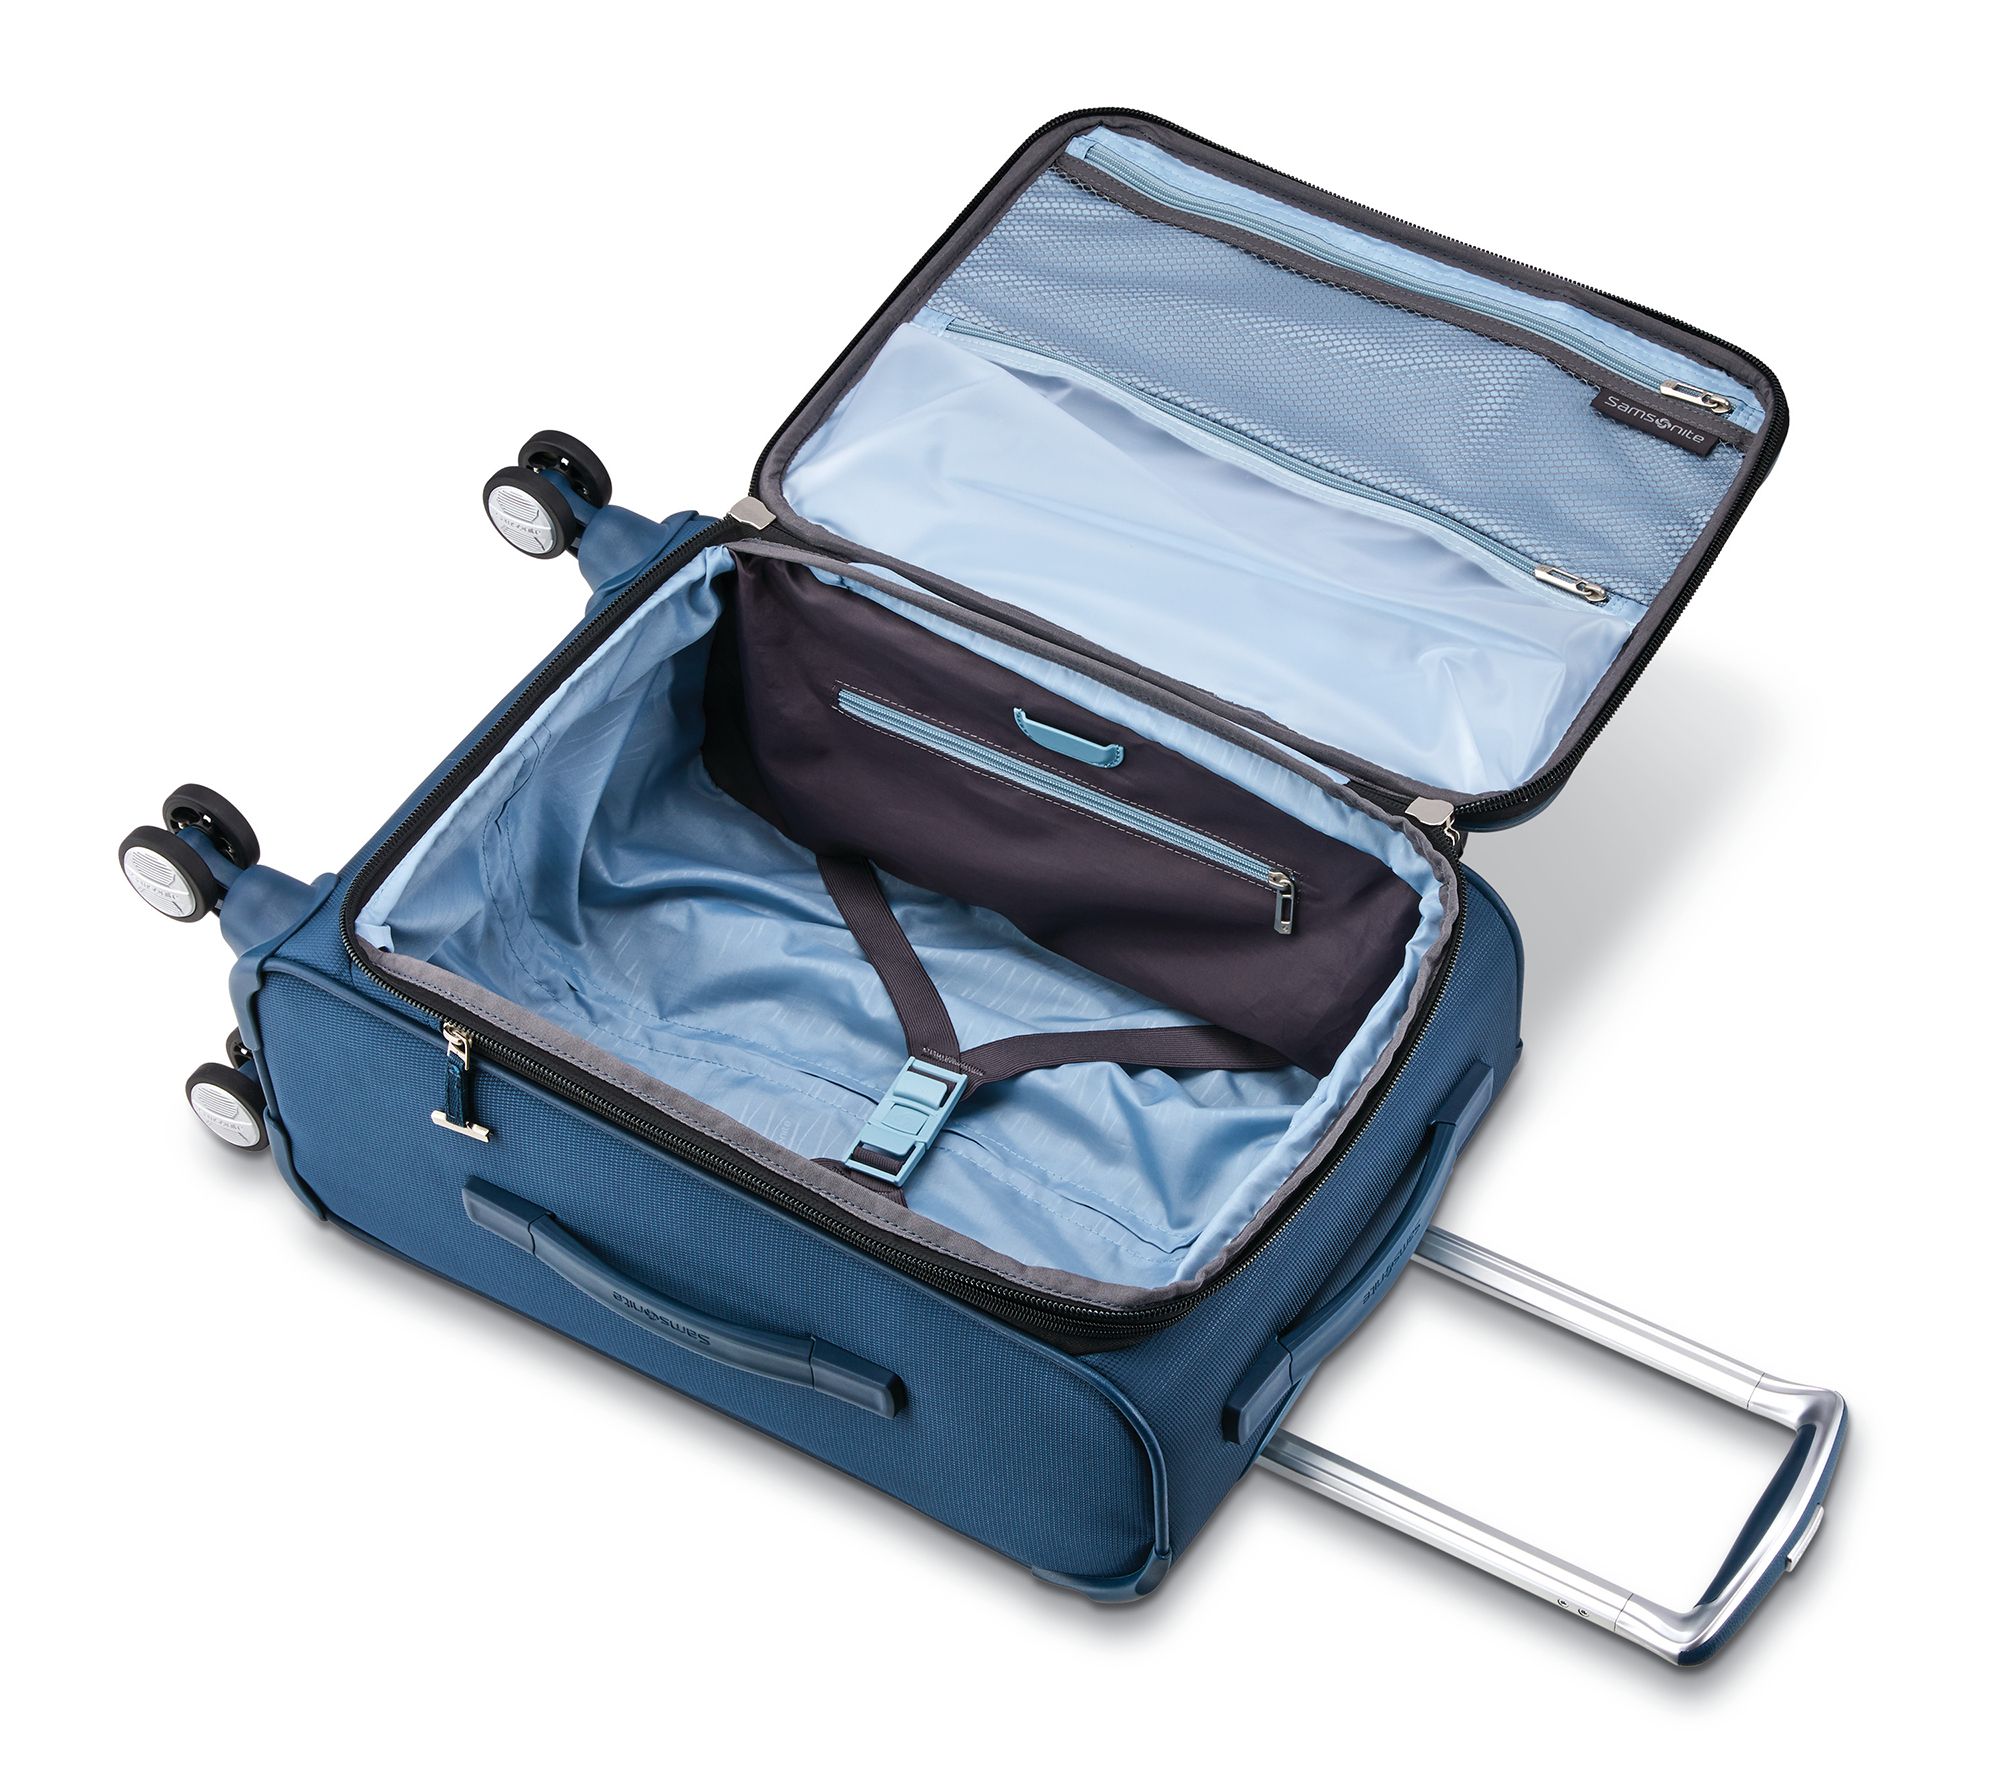 Samsonite Carry On Spinner Luggage Solyte DLX